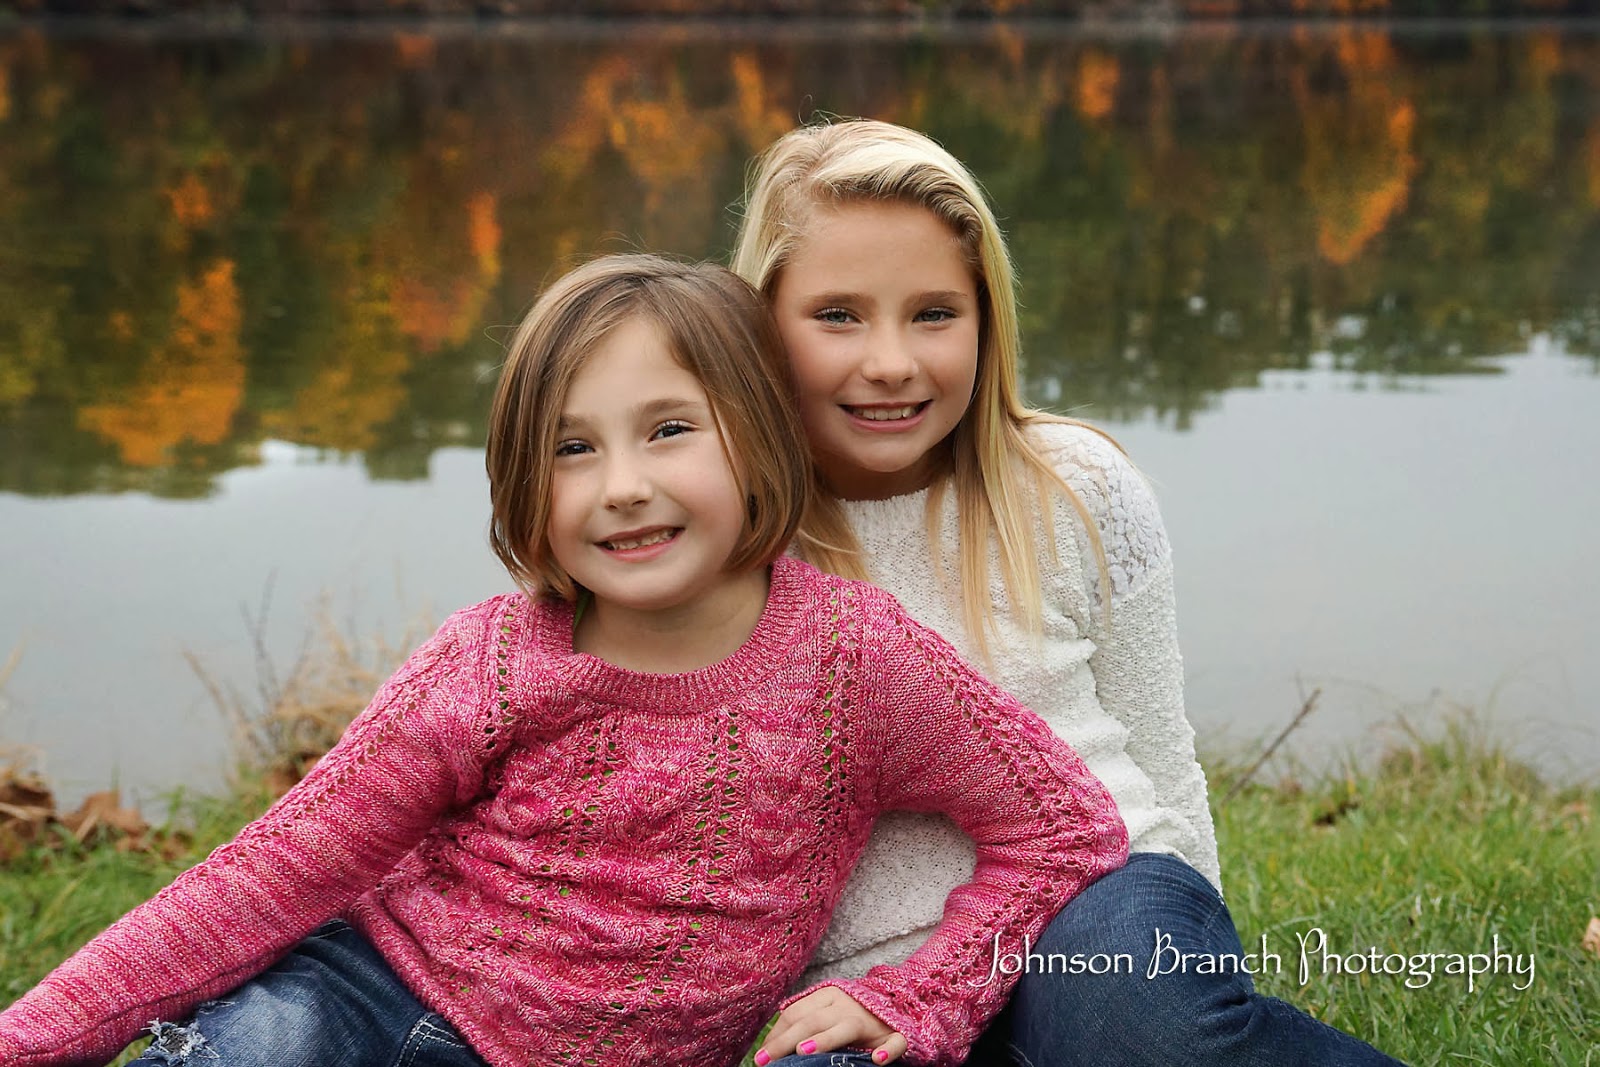 Johnson Branch Photography: Sisters